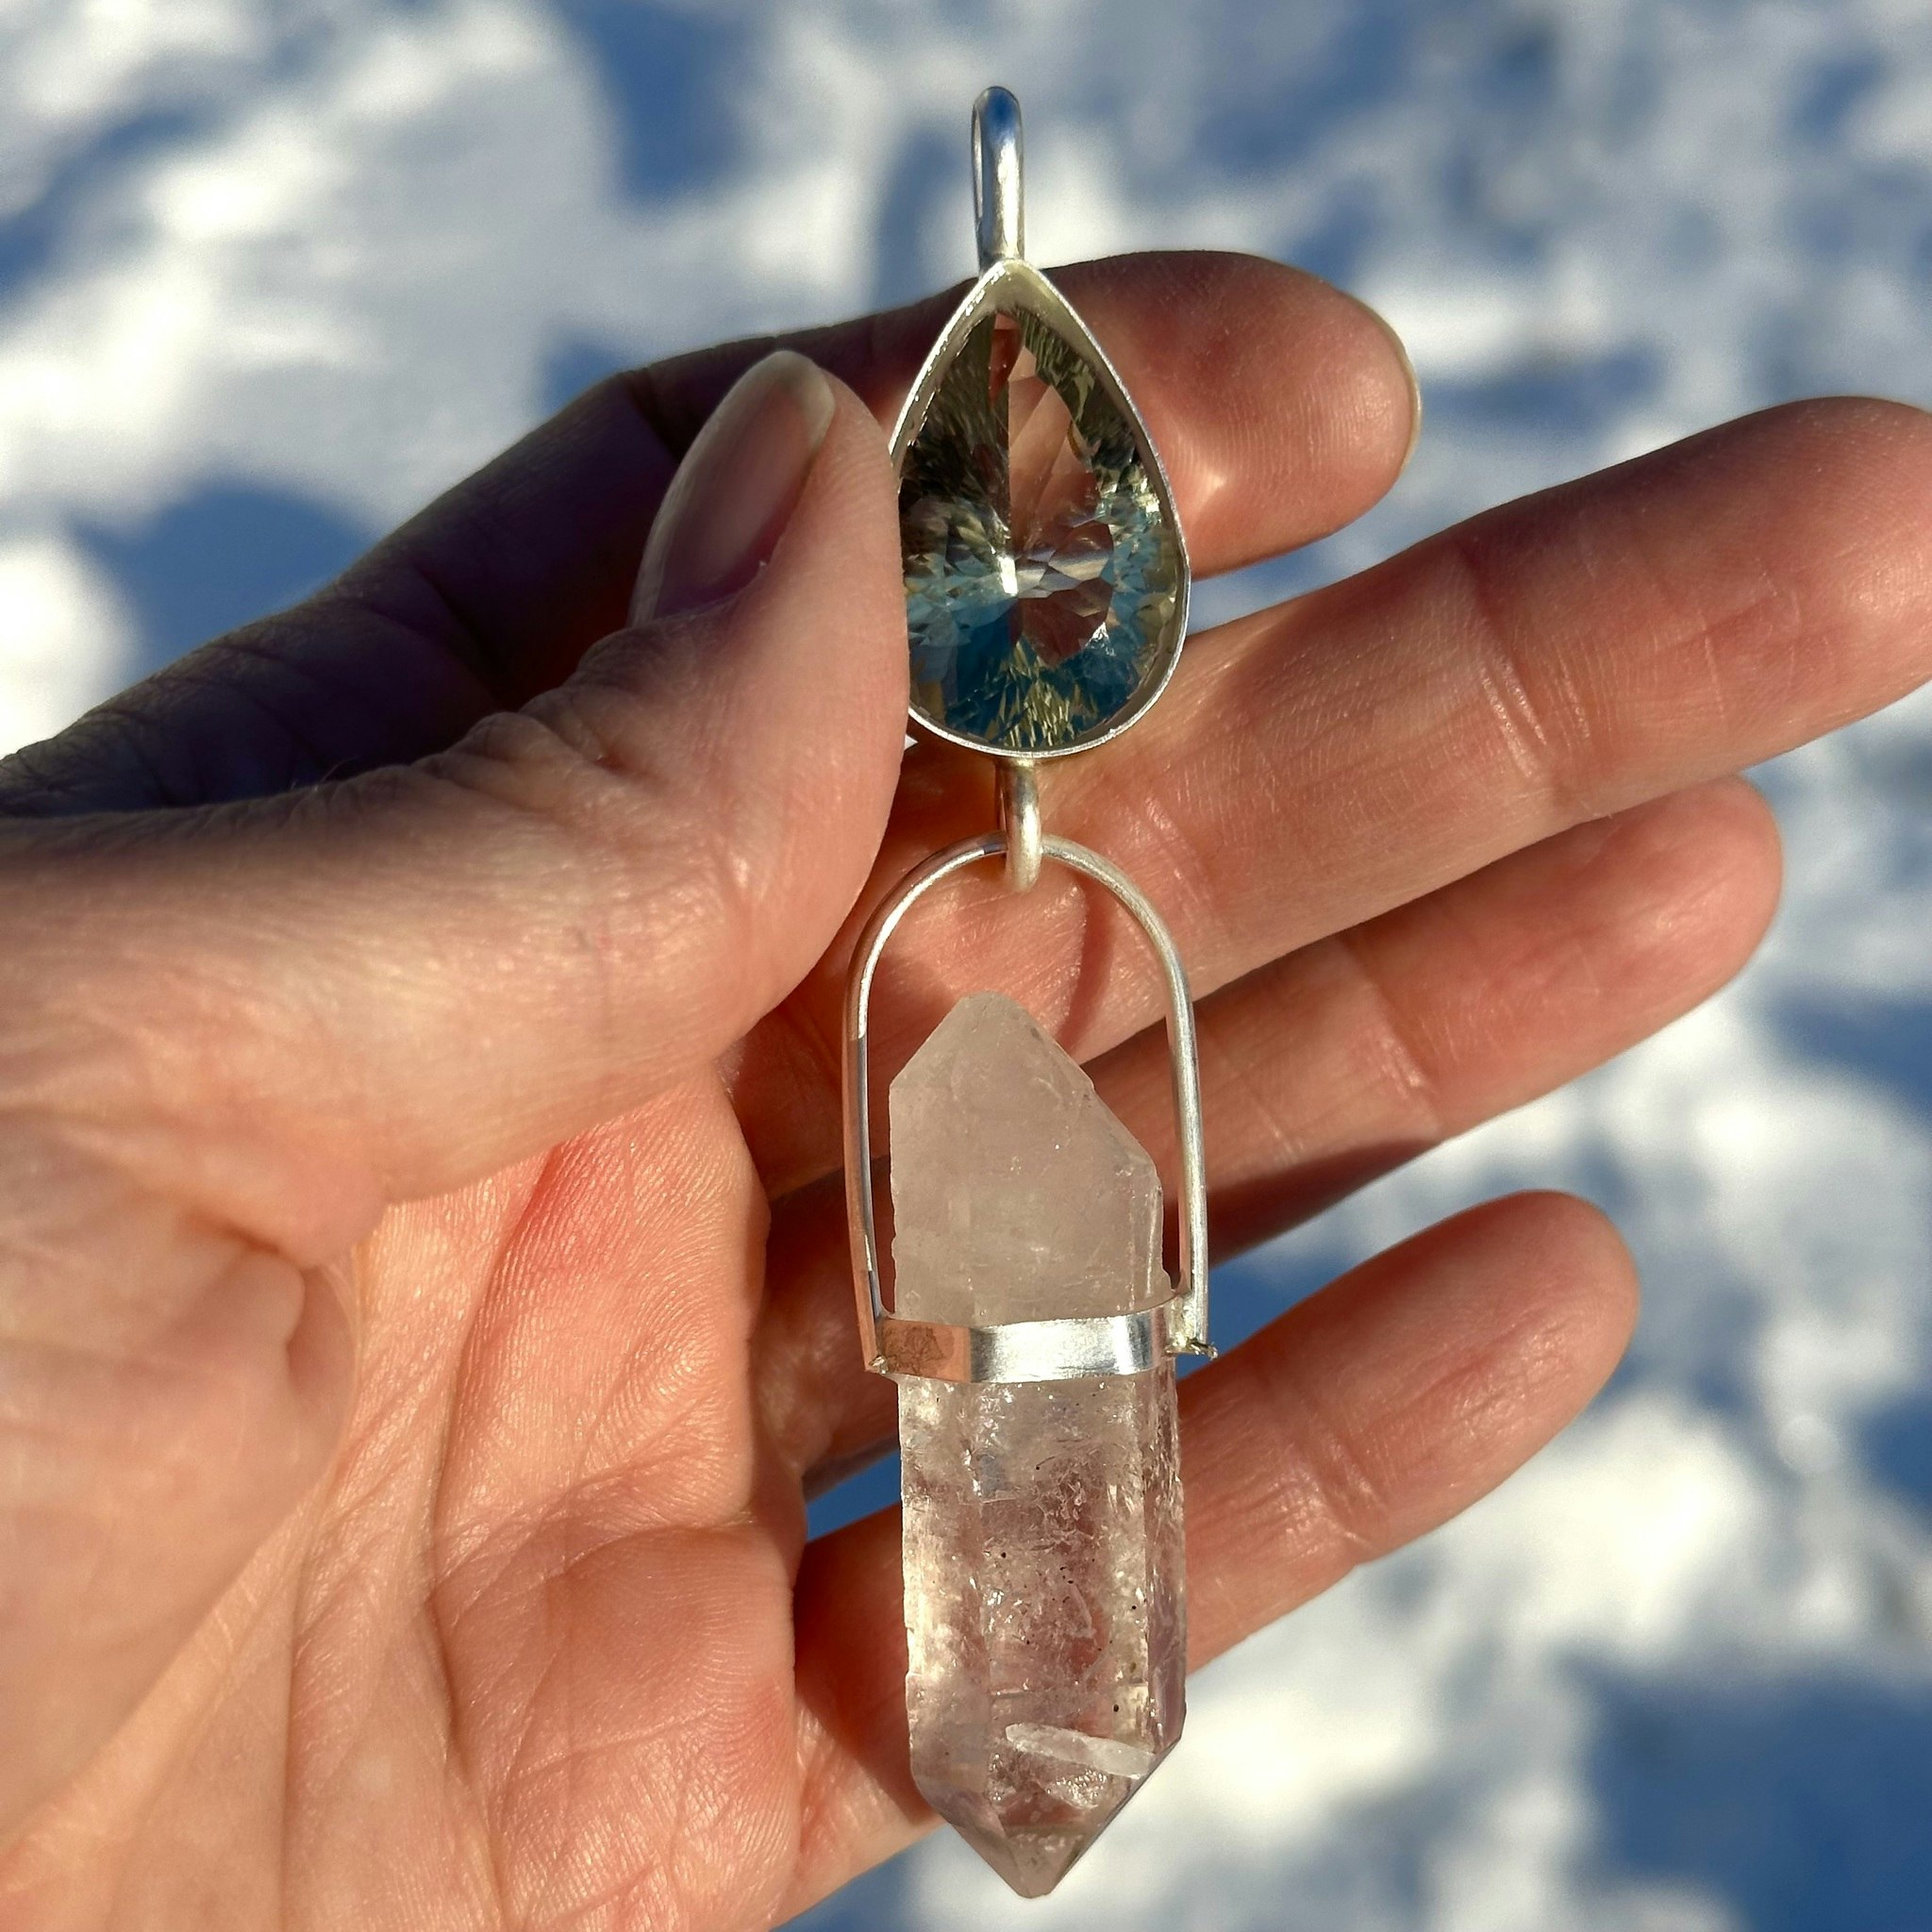 Green amethyst with double terminated Swedish clear quartz crystal